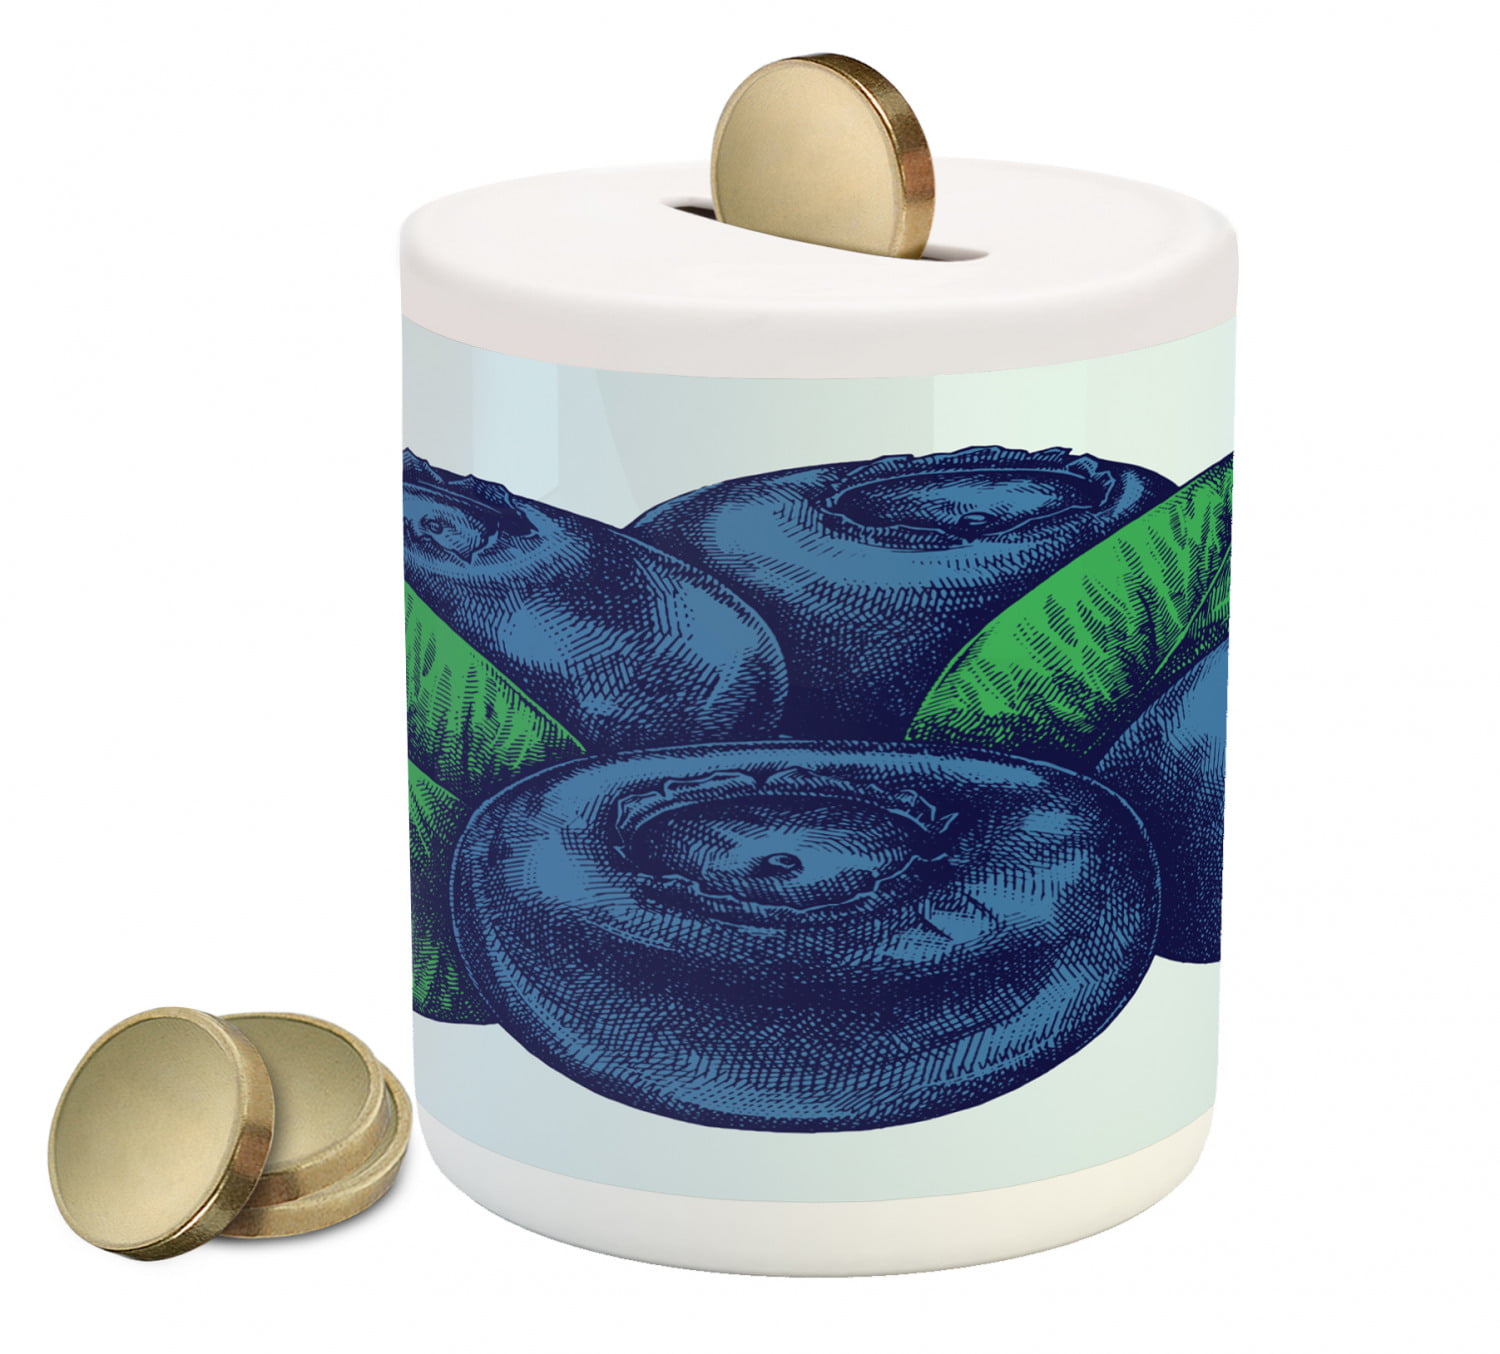 storm Supplement Beschrijving Vintage Blue Piggy Bank, Retro Style Hand Drawn Art of Blueberry Fruit with  Leaves, Ceramic Coin Bank Money Box for Cash Saving, 3.6" X 3.2", Pale Blue  Navy Blue, by Ambesonne -